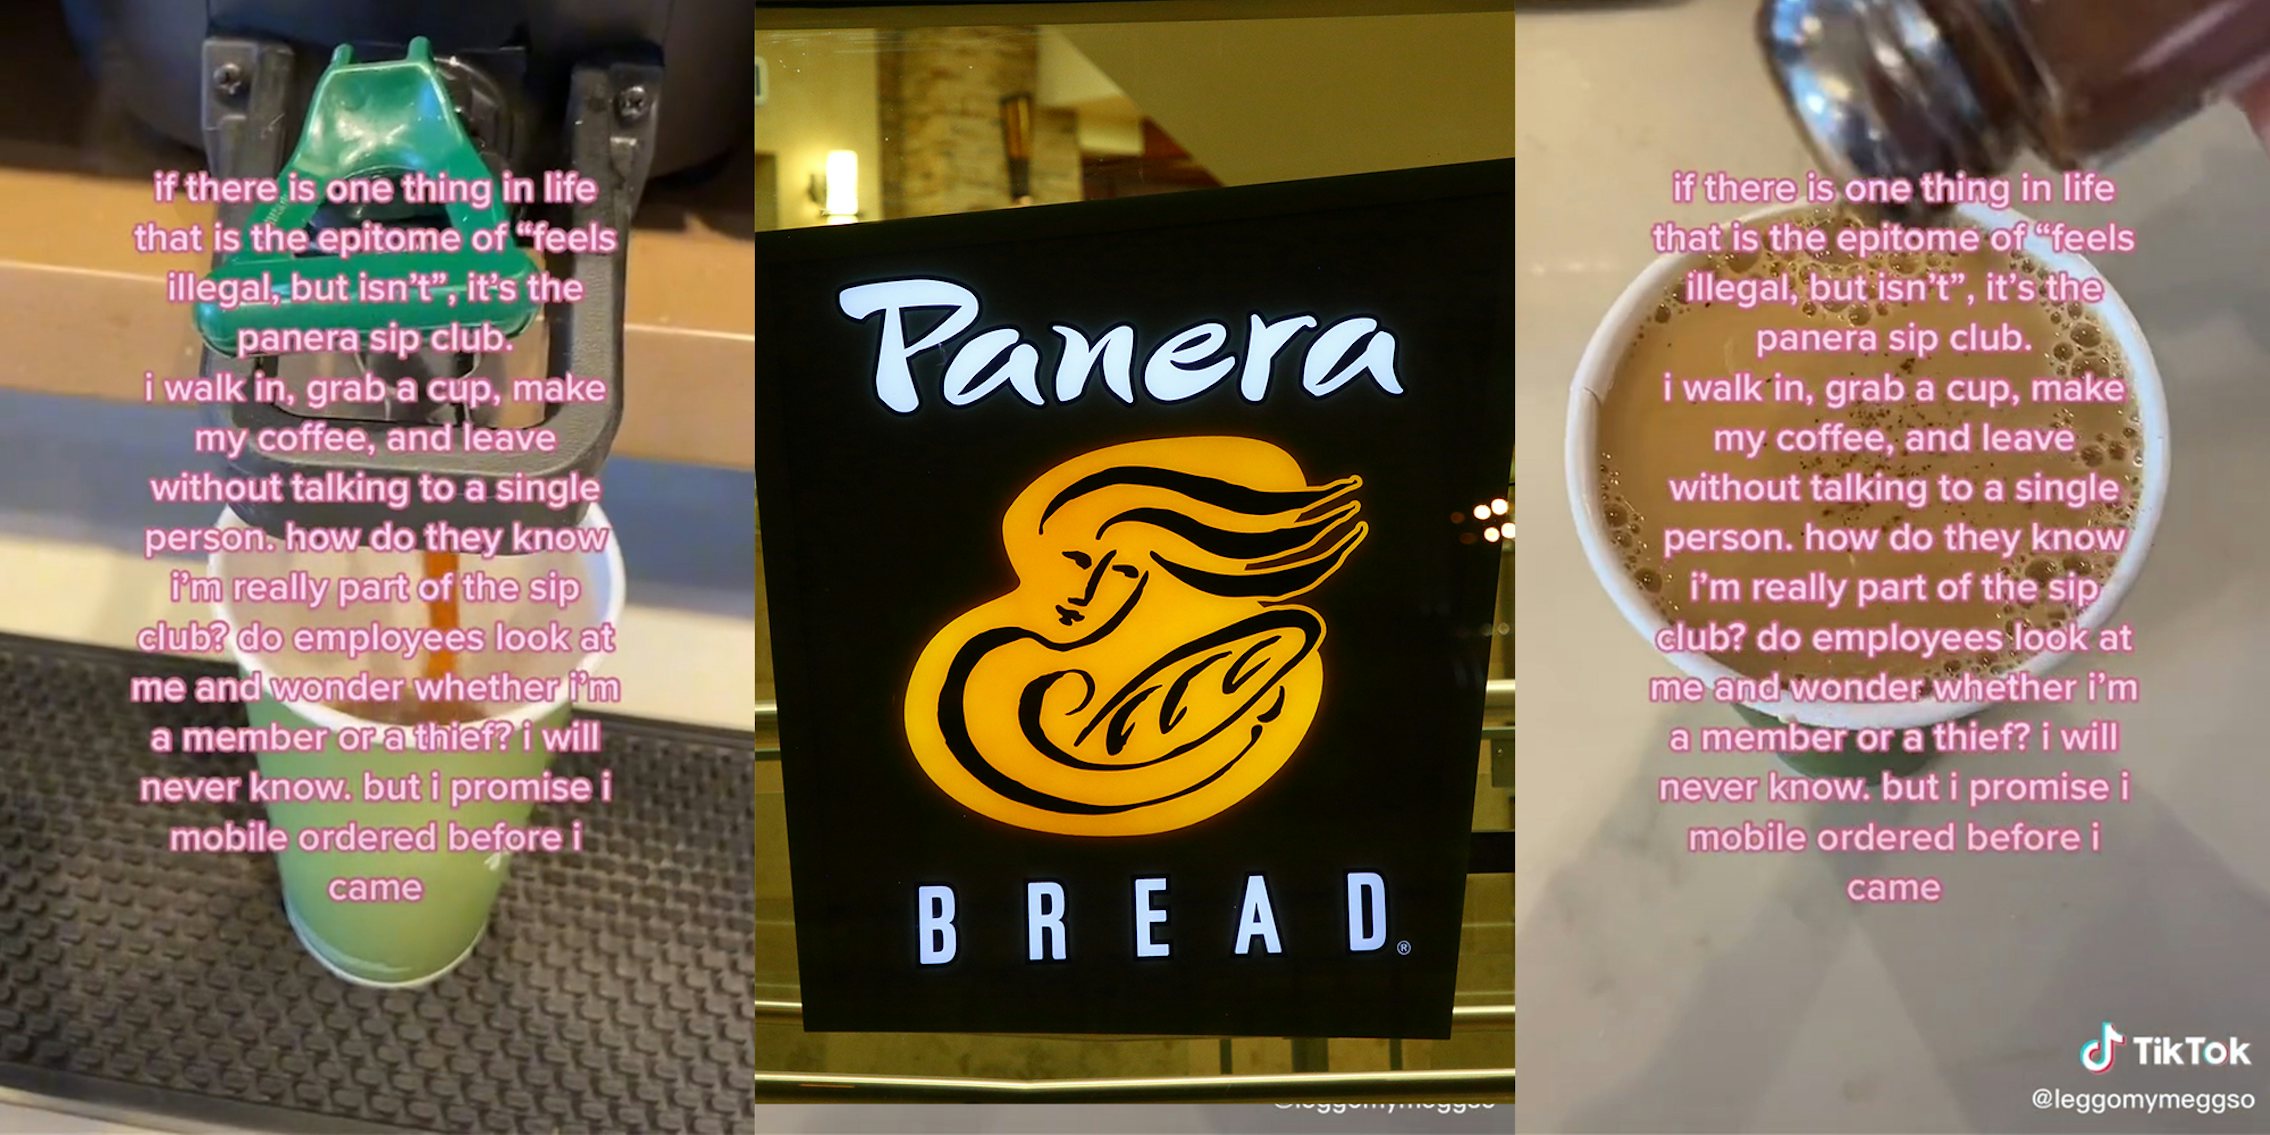 Customer’s Video About Panera’s ‘Sip Club’ Sparks Debate